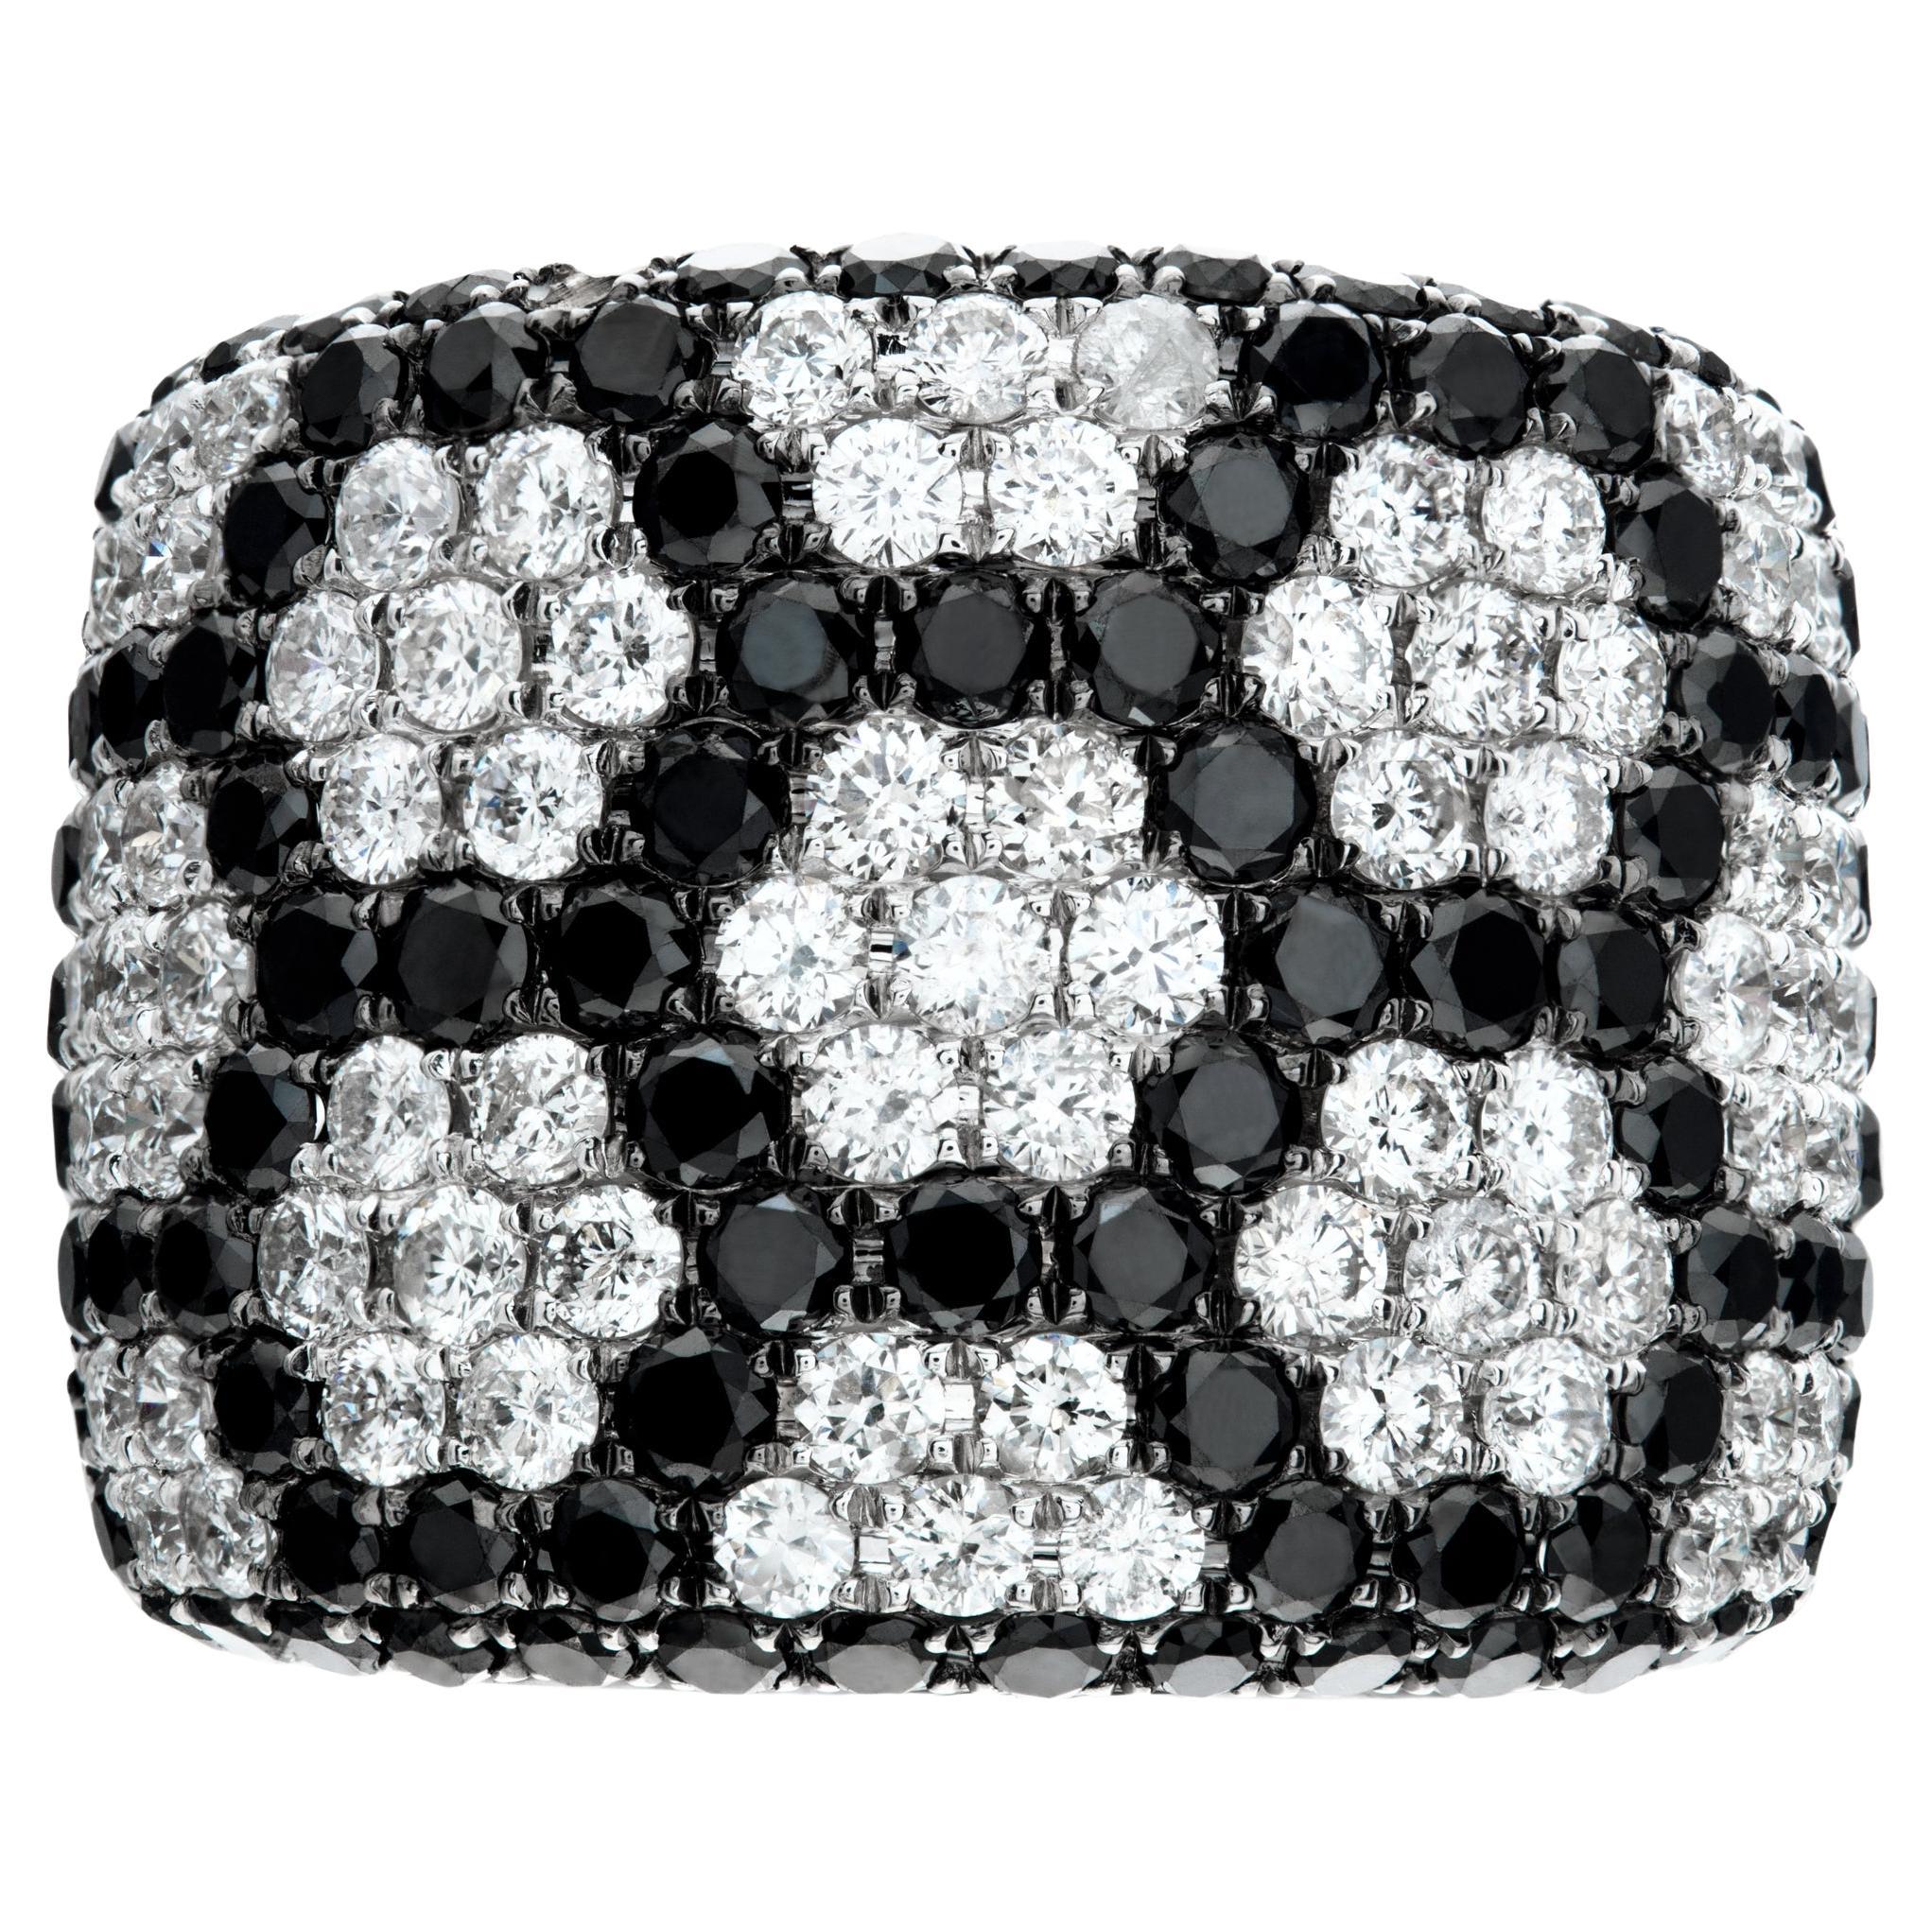 B&W diamonds ring set in white gold diamonds approx weight 3.00 carats Size 5. For Sale